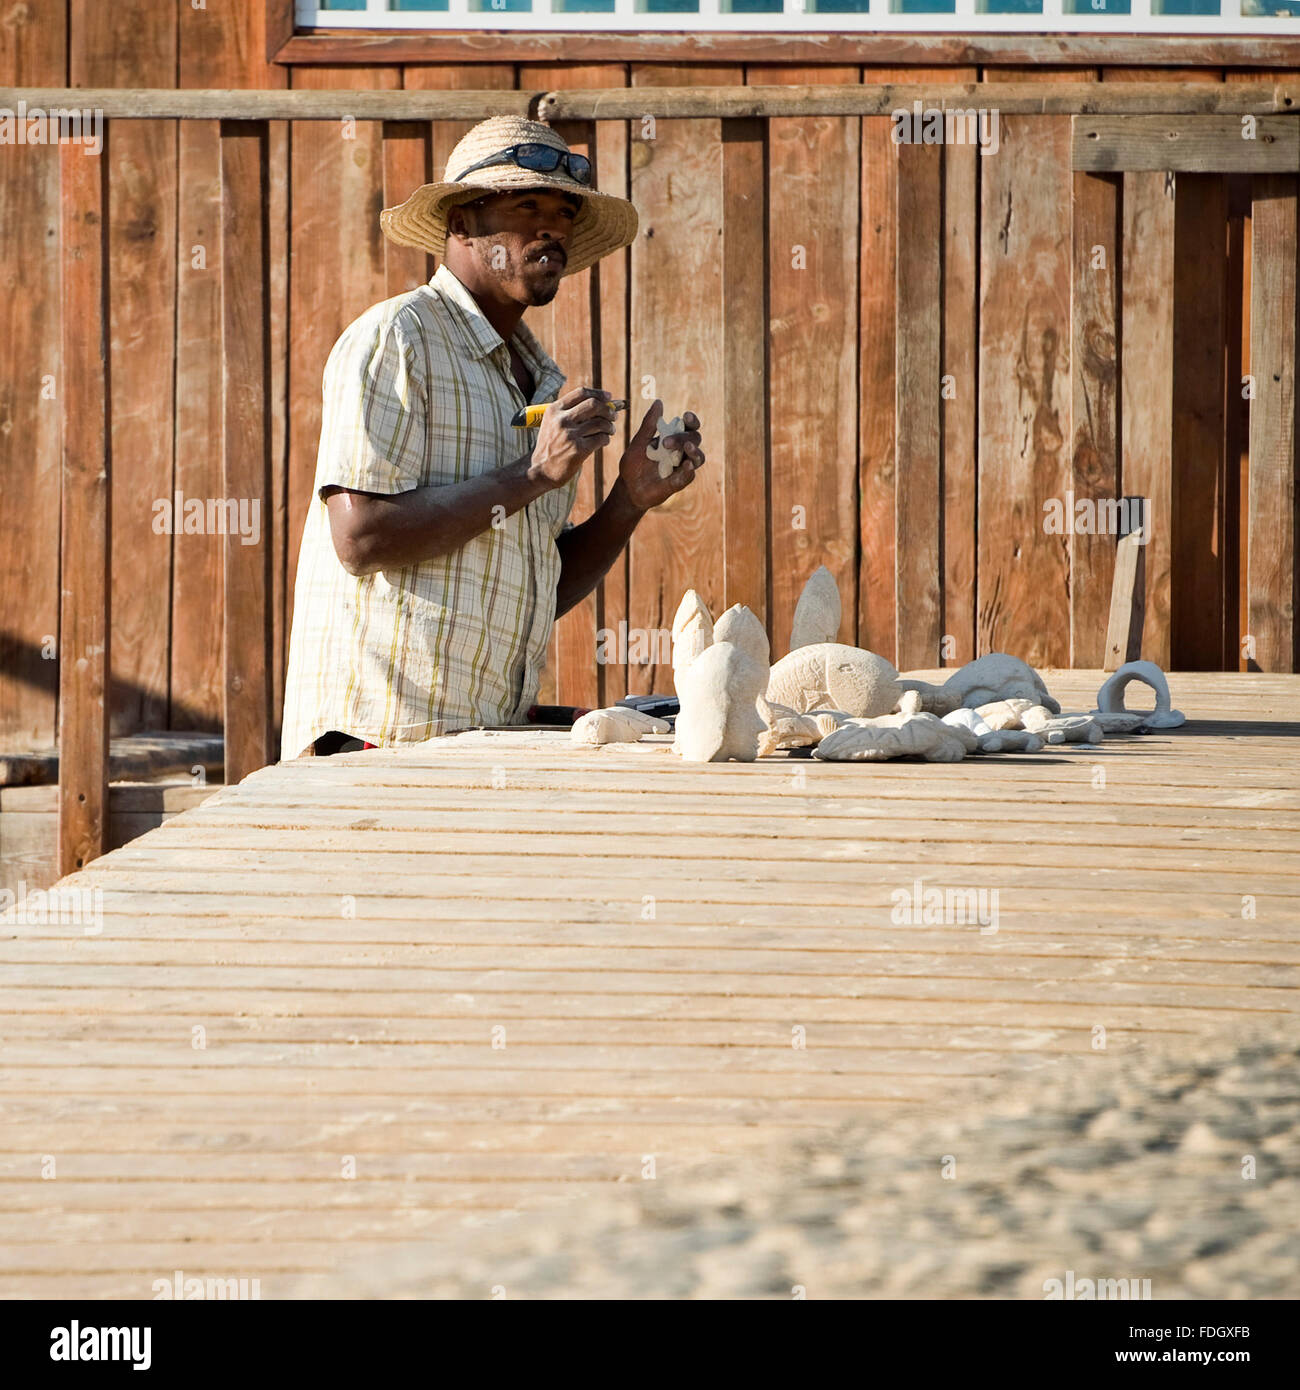 Square portrait of a local man carving turtle figures in Cape Verde. Stock Photo